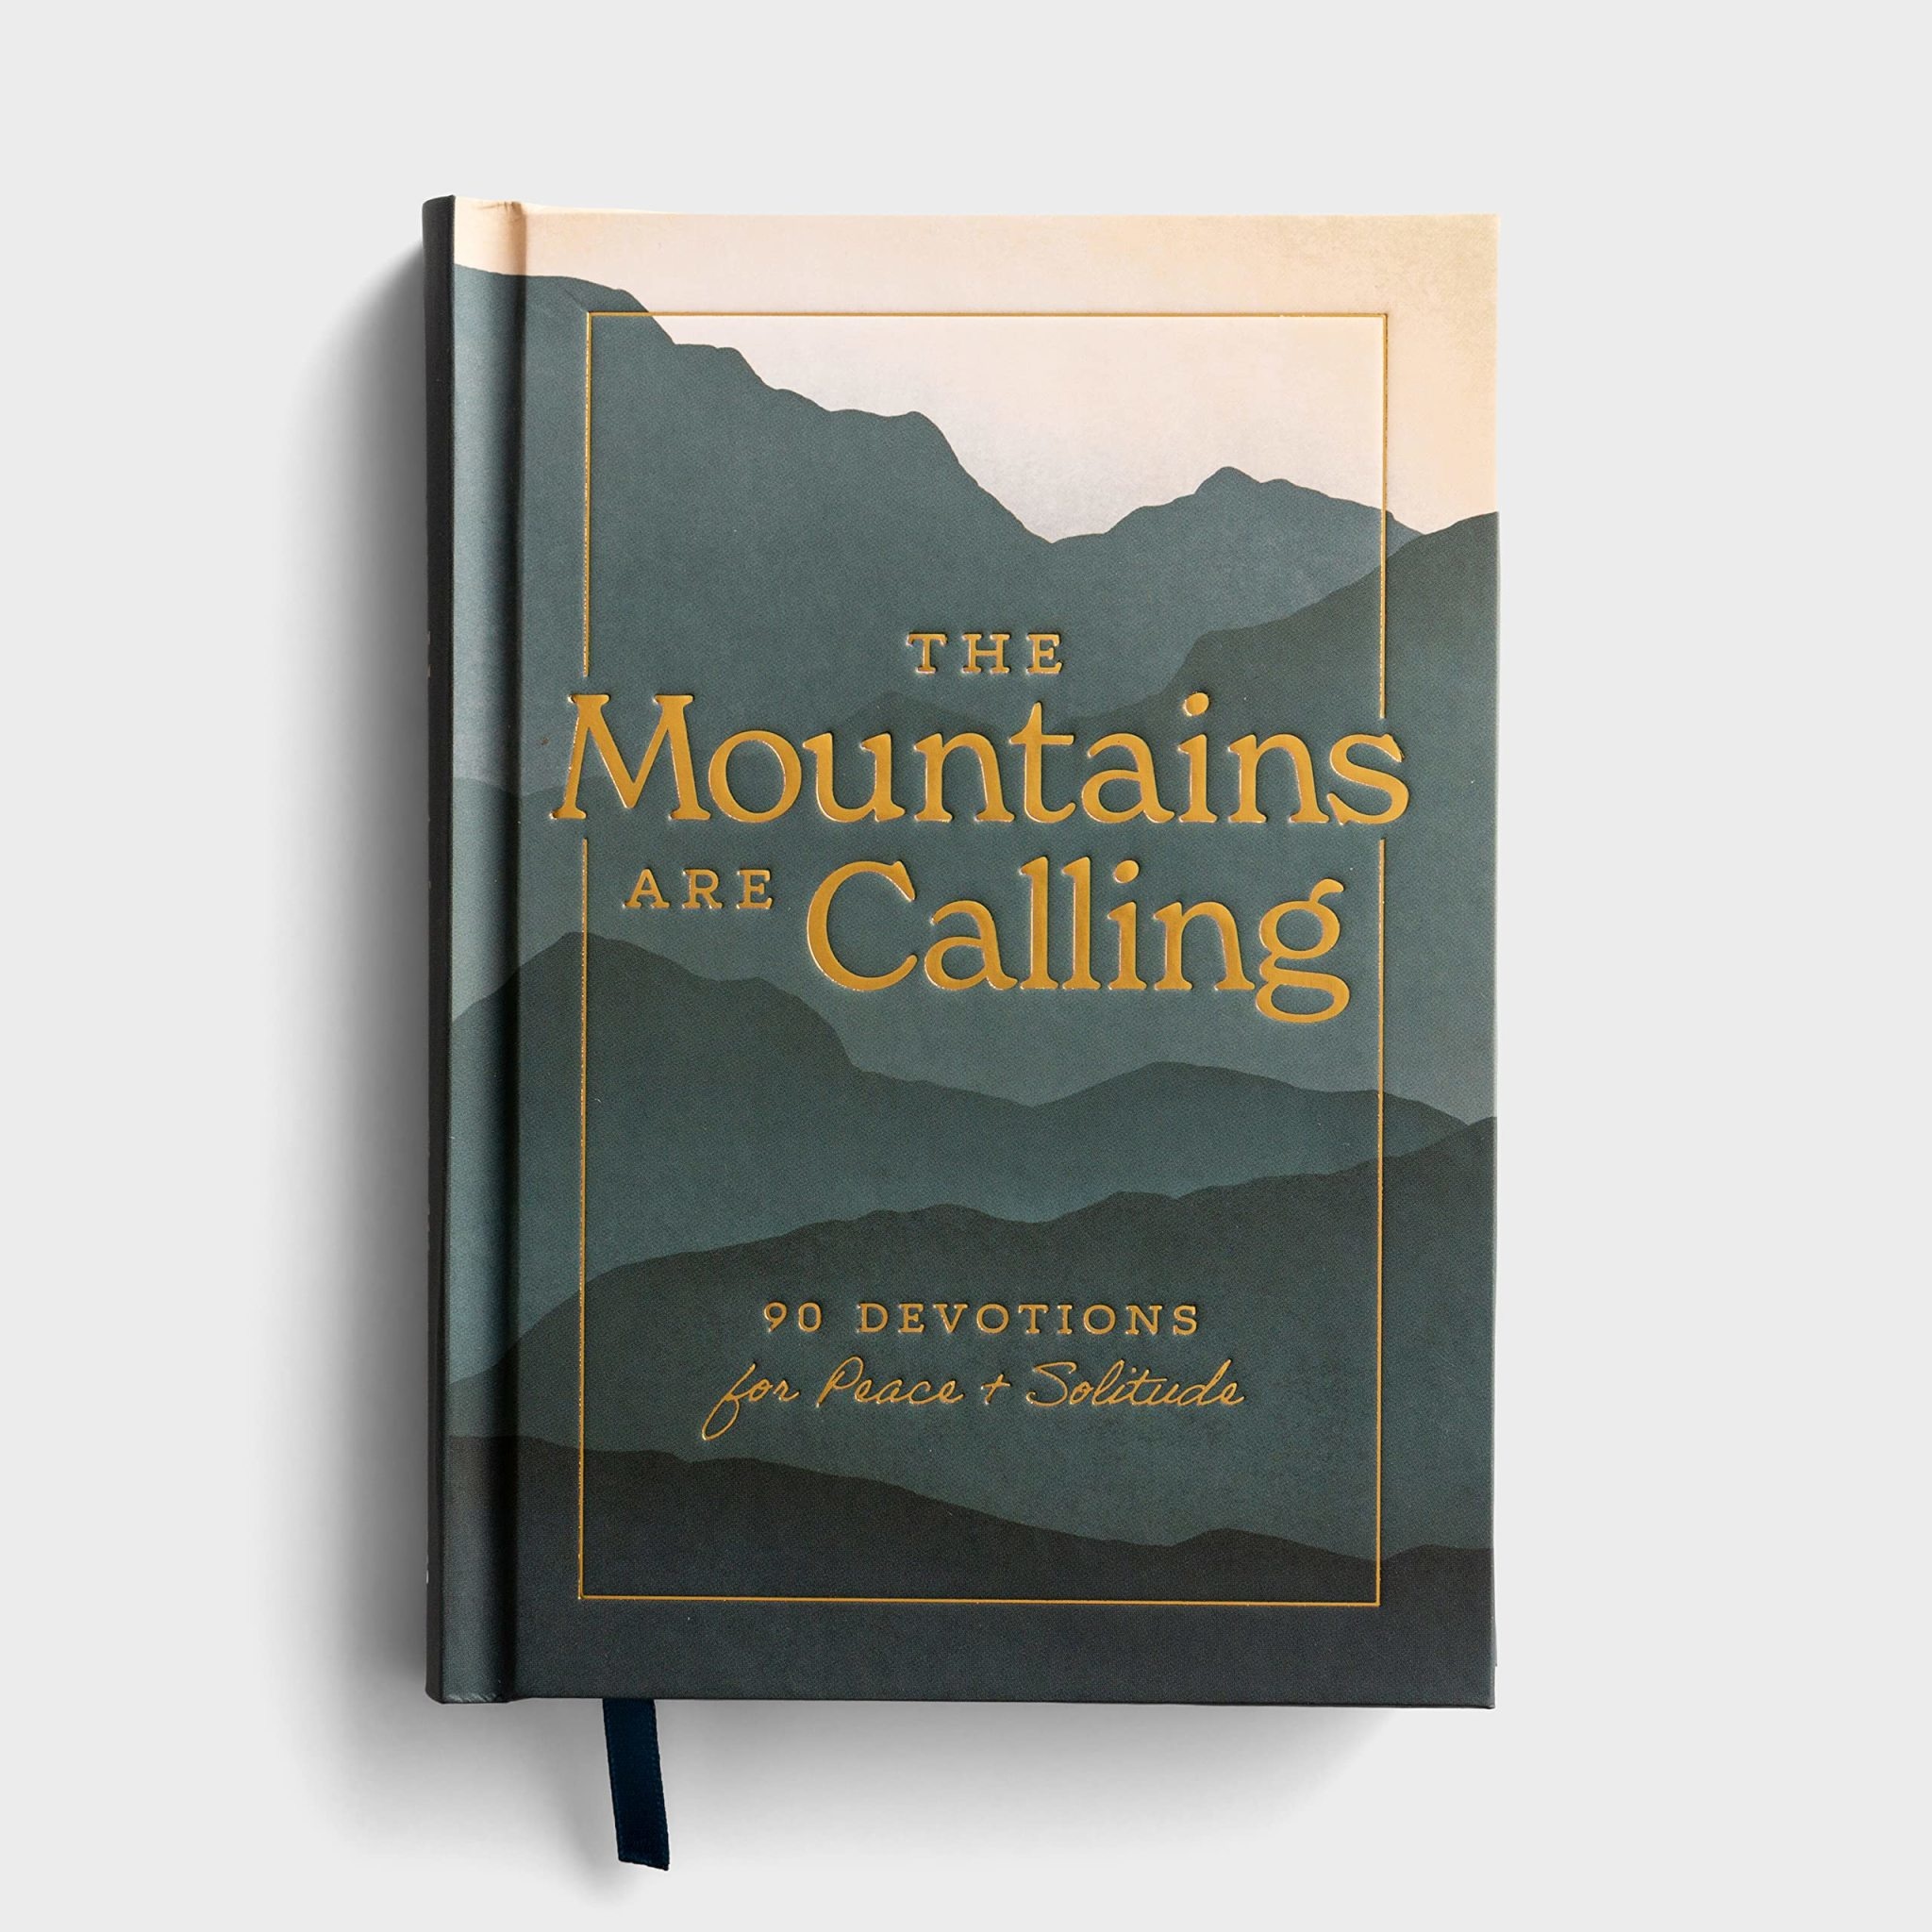 The Mountains Are Calling: 90 Devotions For Peace & Solitude